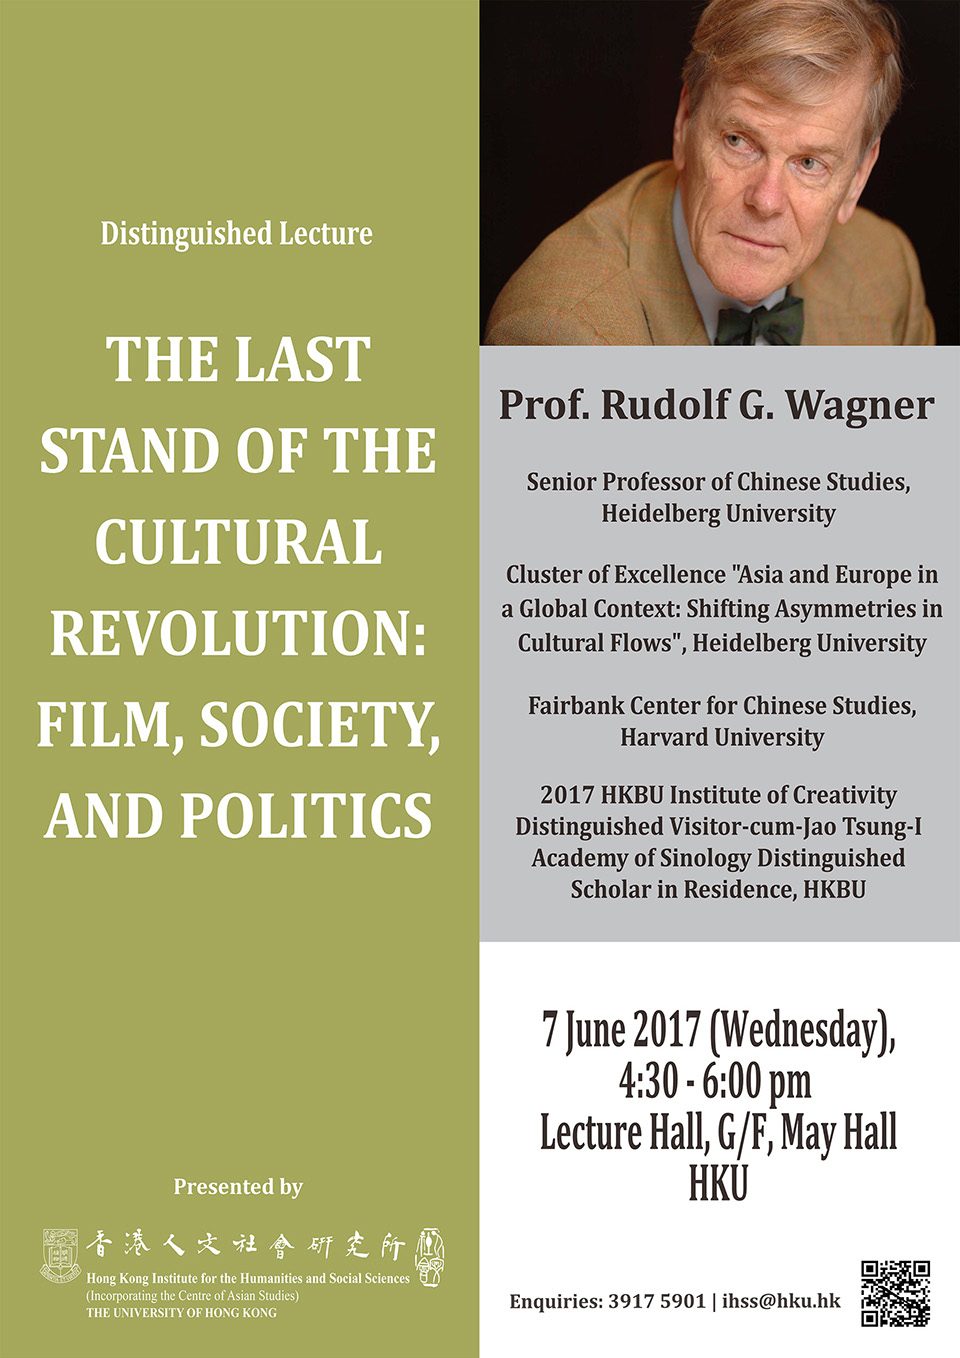 Distinguished Lecture on “The Last Stand of the Cultural Revolution: Film, Society, and Politics” by Prof. Rudolf G. Wagner (June 7, 2017)